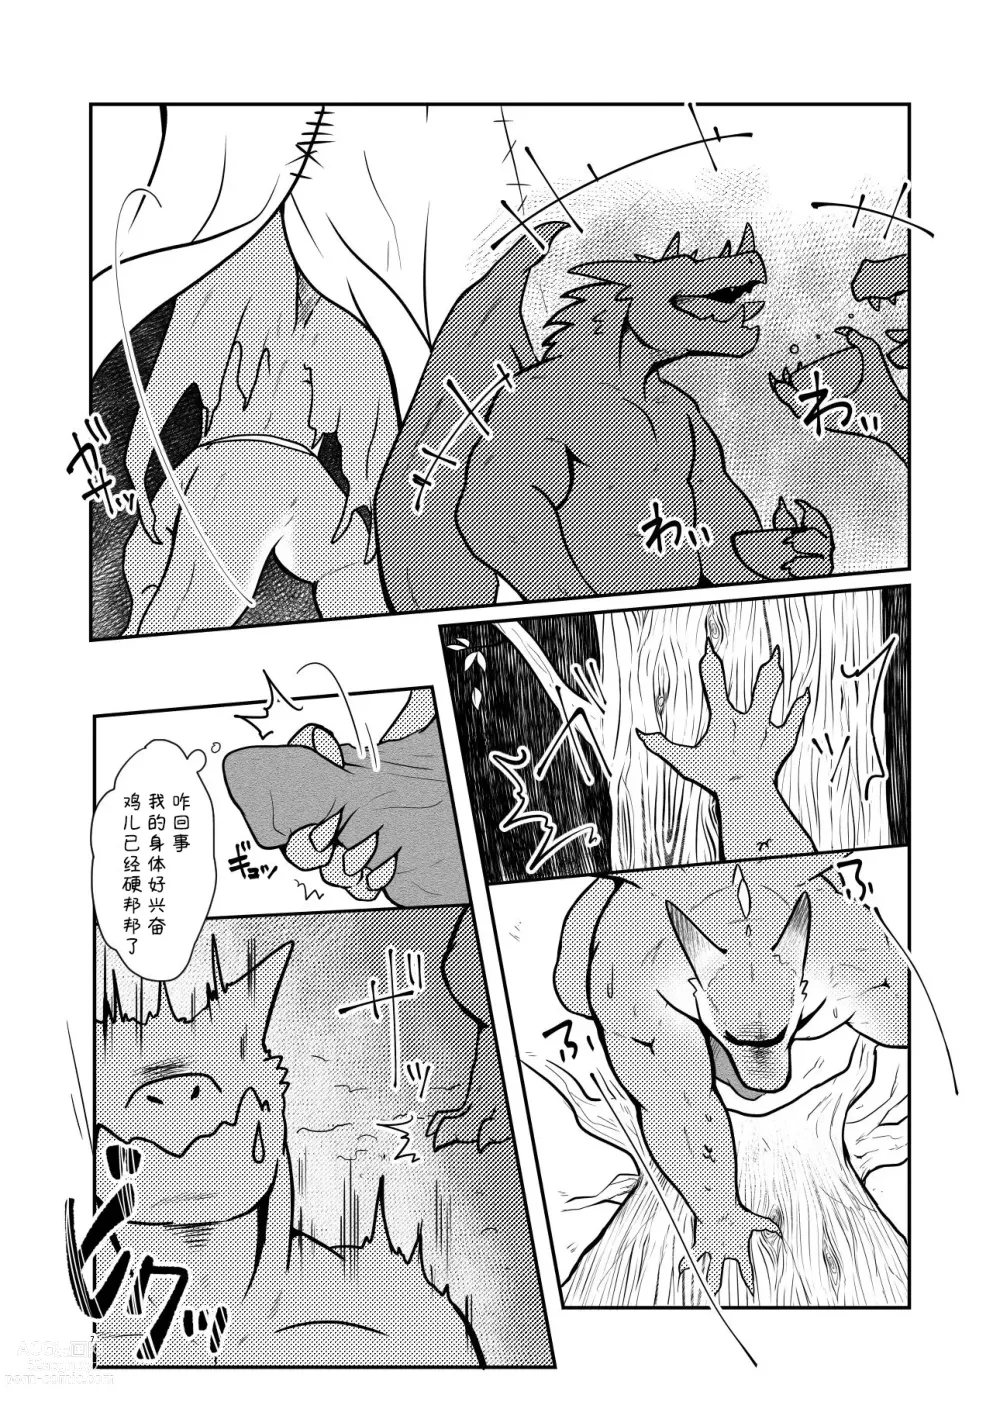 Page 7 of doujinshi 砰砰砰心乱跳